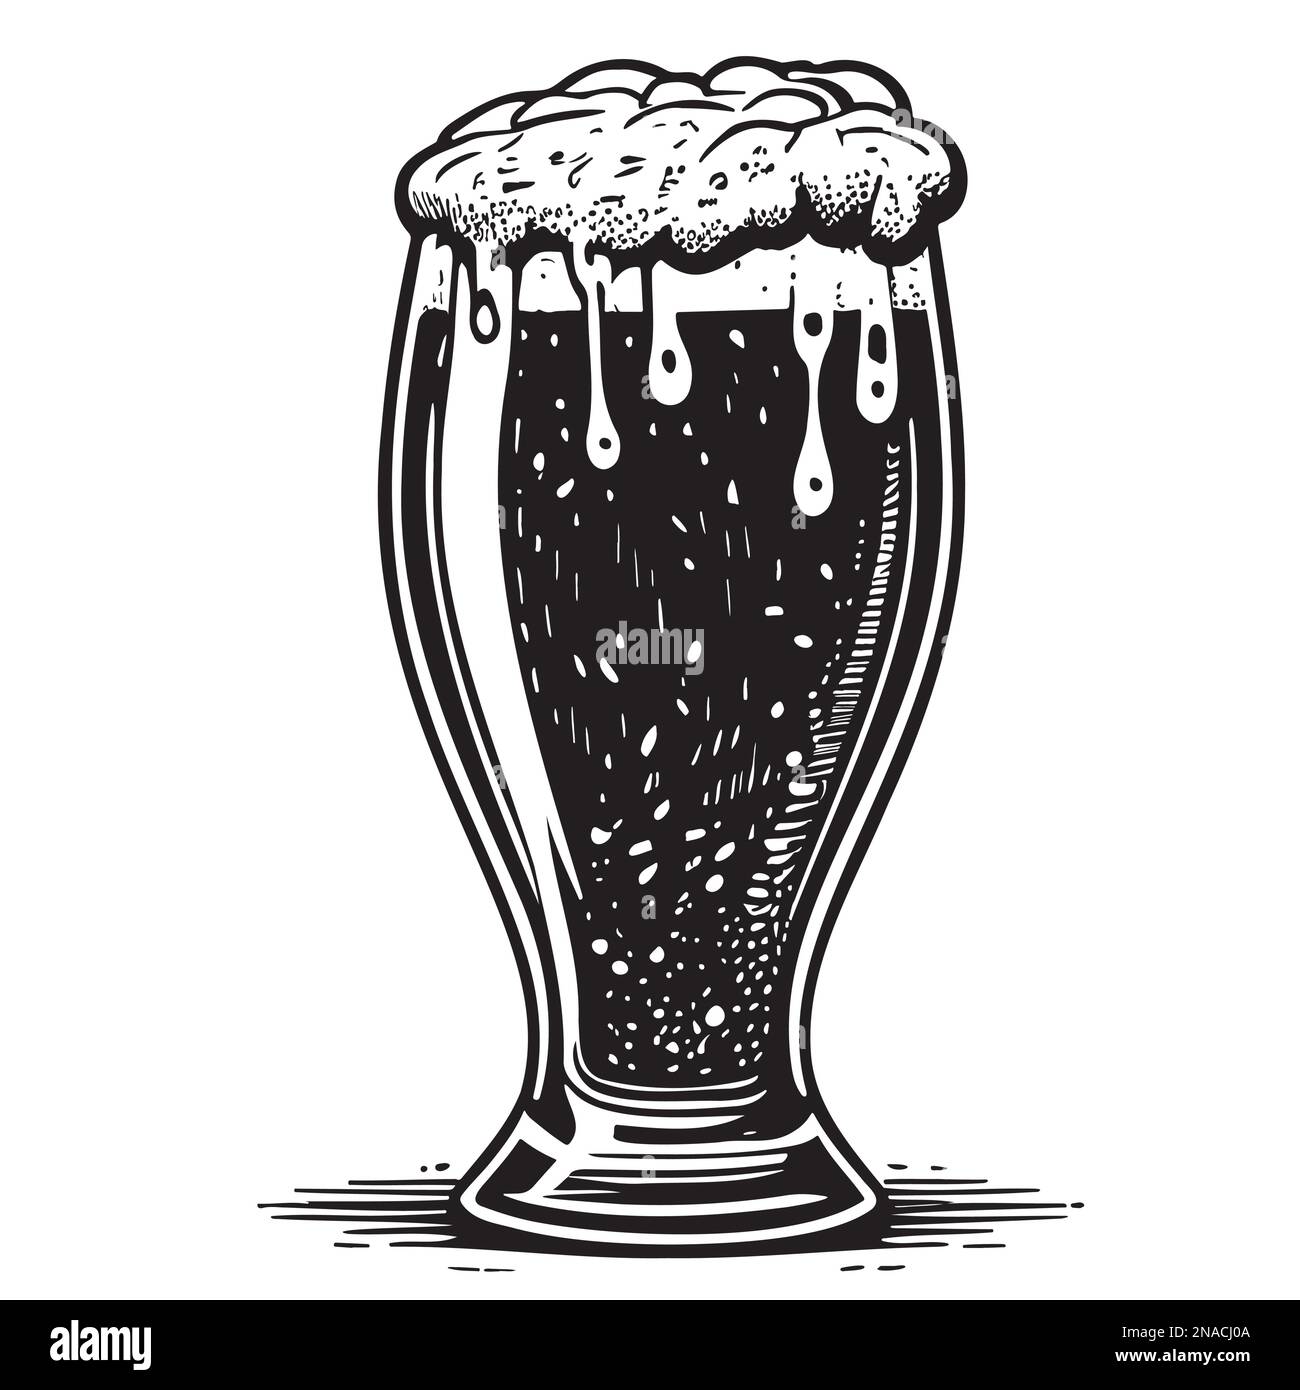 Glass of beer hand drawn sketch Vector illustration Stock Vector